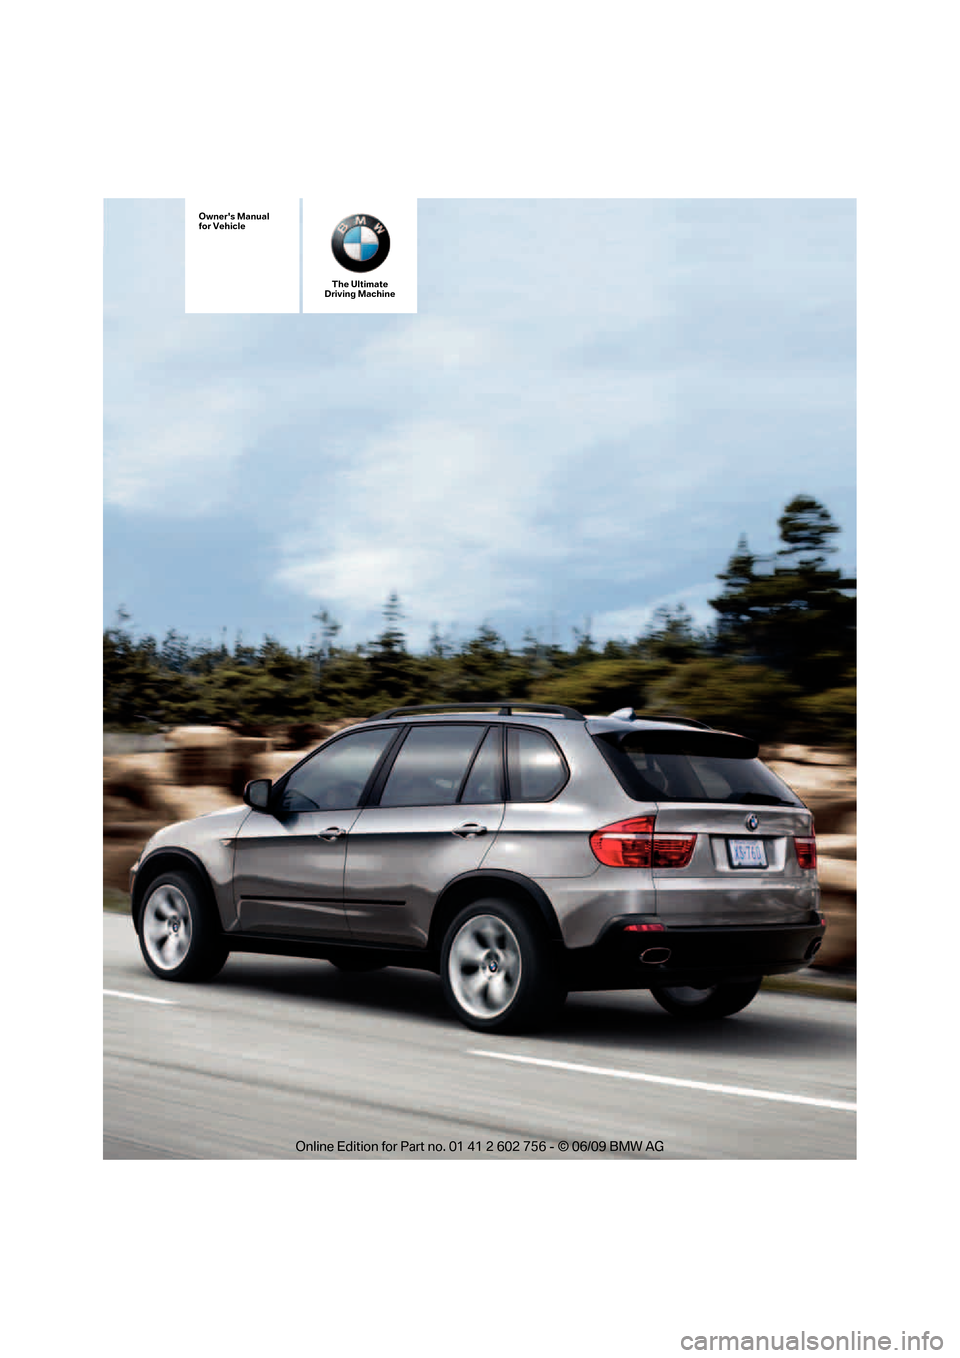 BMW X6M 2010 E71 Owners Manual The Ultimate
Driving Machine
Owners Manual
for Vehicle
ba8_e70ag.book  Seite 1  Freitag, 5. Juni 2009  11:42 11 